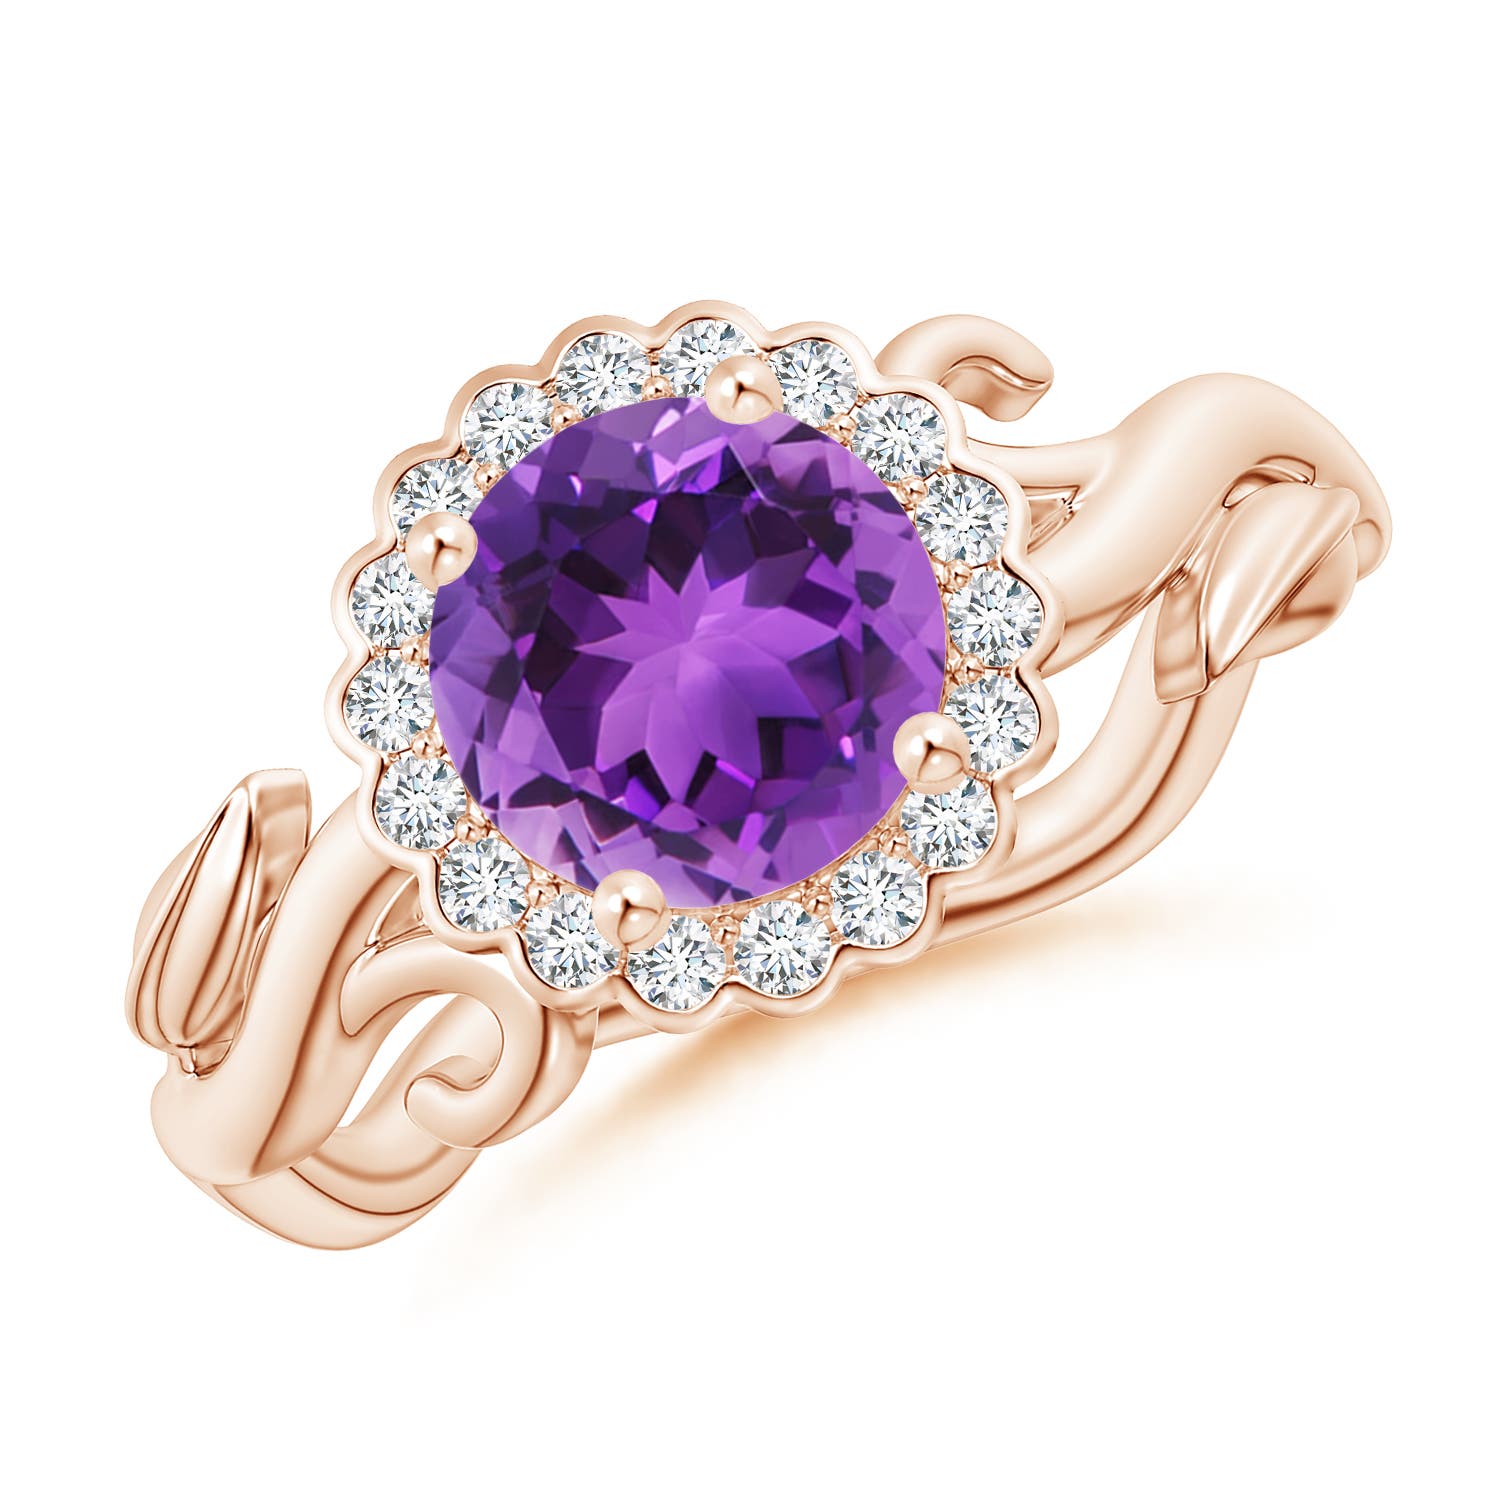 AAA - Amethyst / 1.33 CT / 14 KT Rose Gold